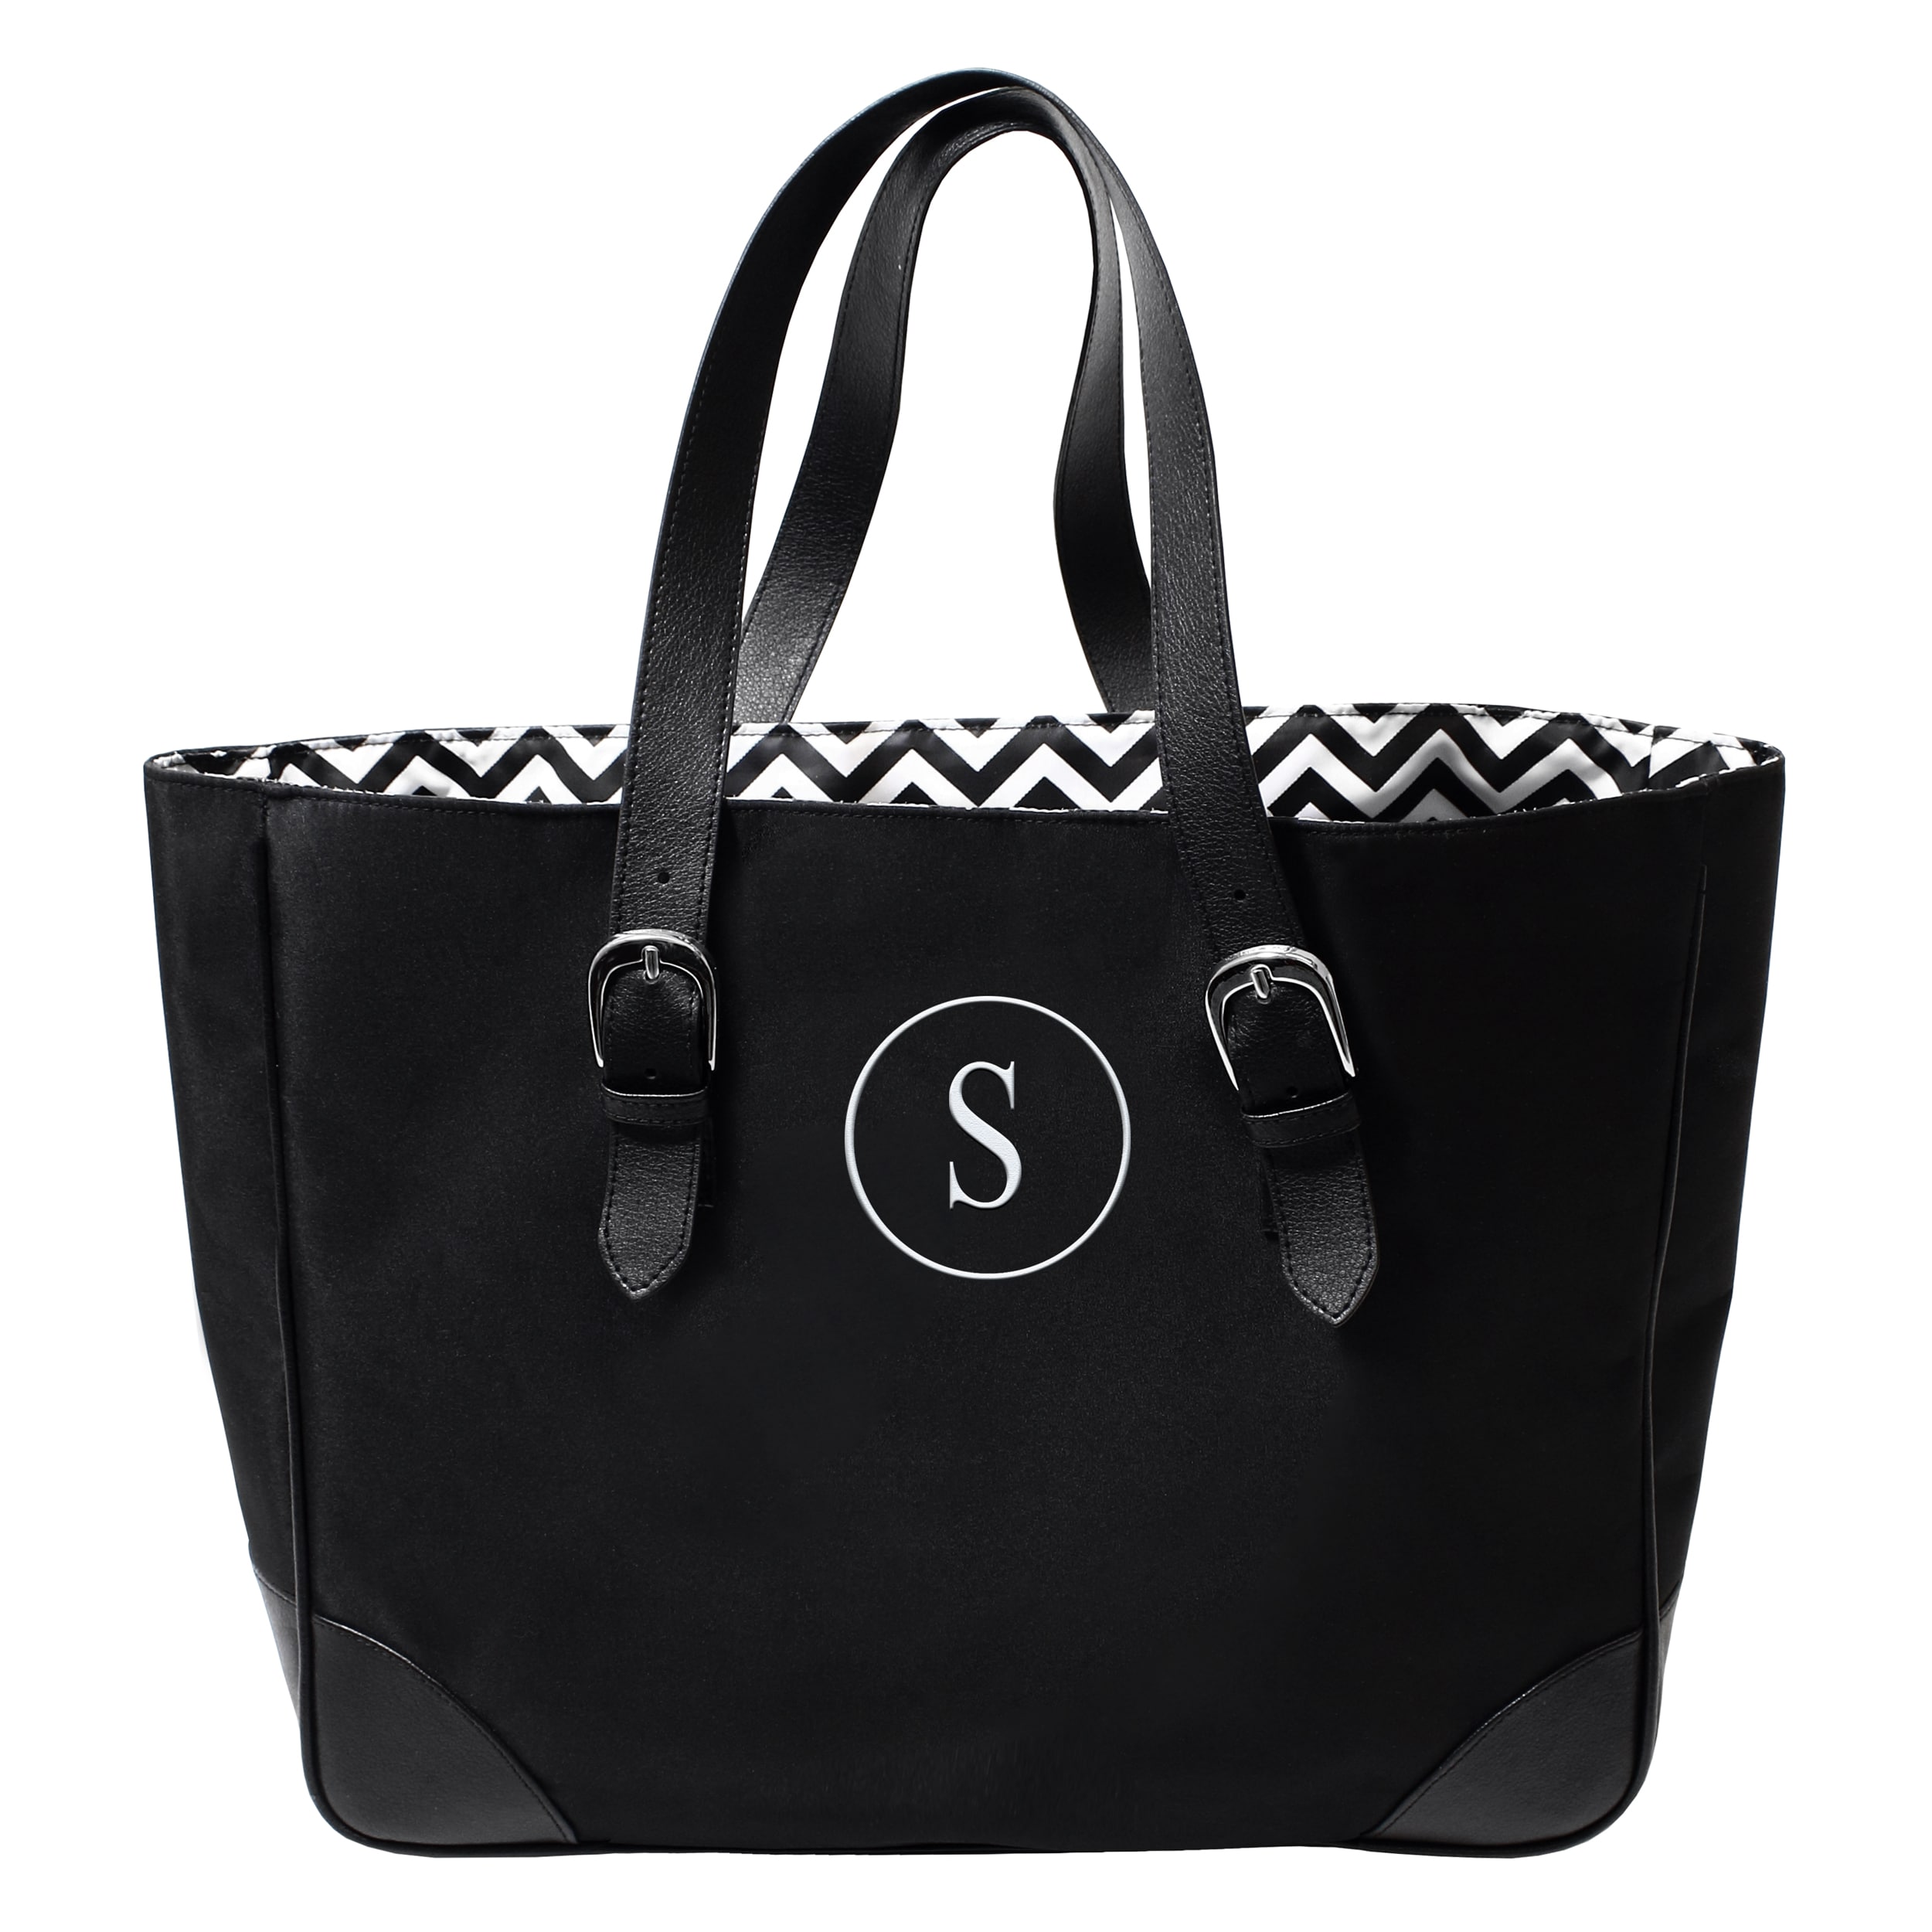 Personalized Black/ White Chevron Buckle Tote Bag - Overstock Shopping - Great Deals on Tote Bags